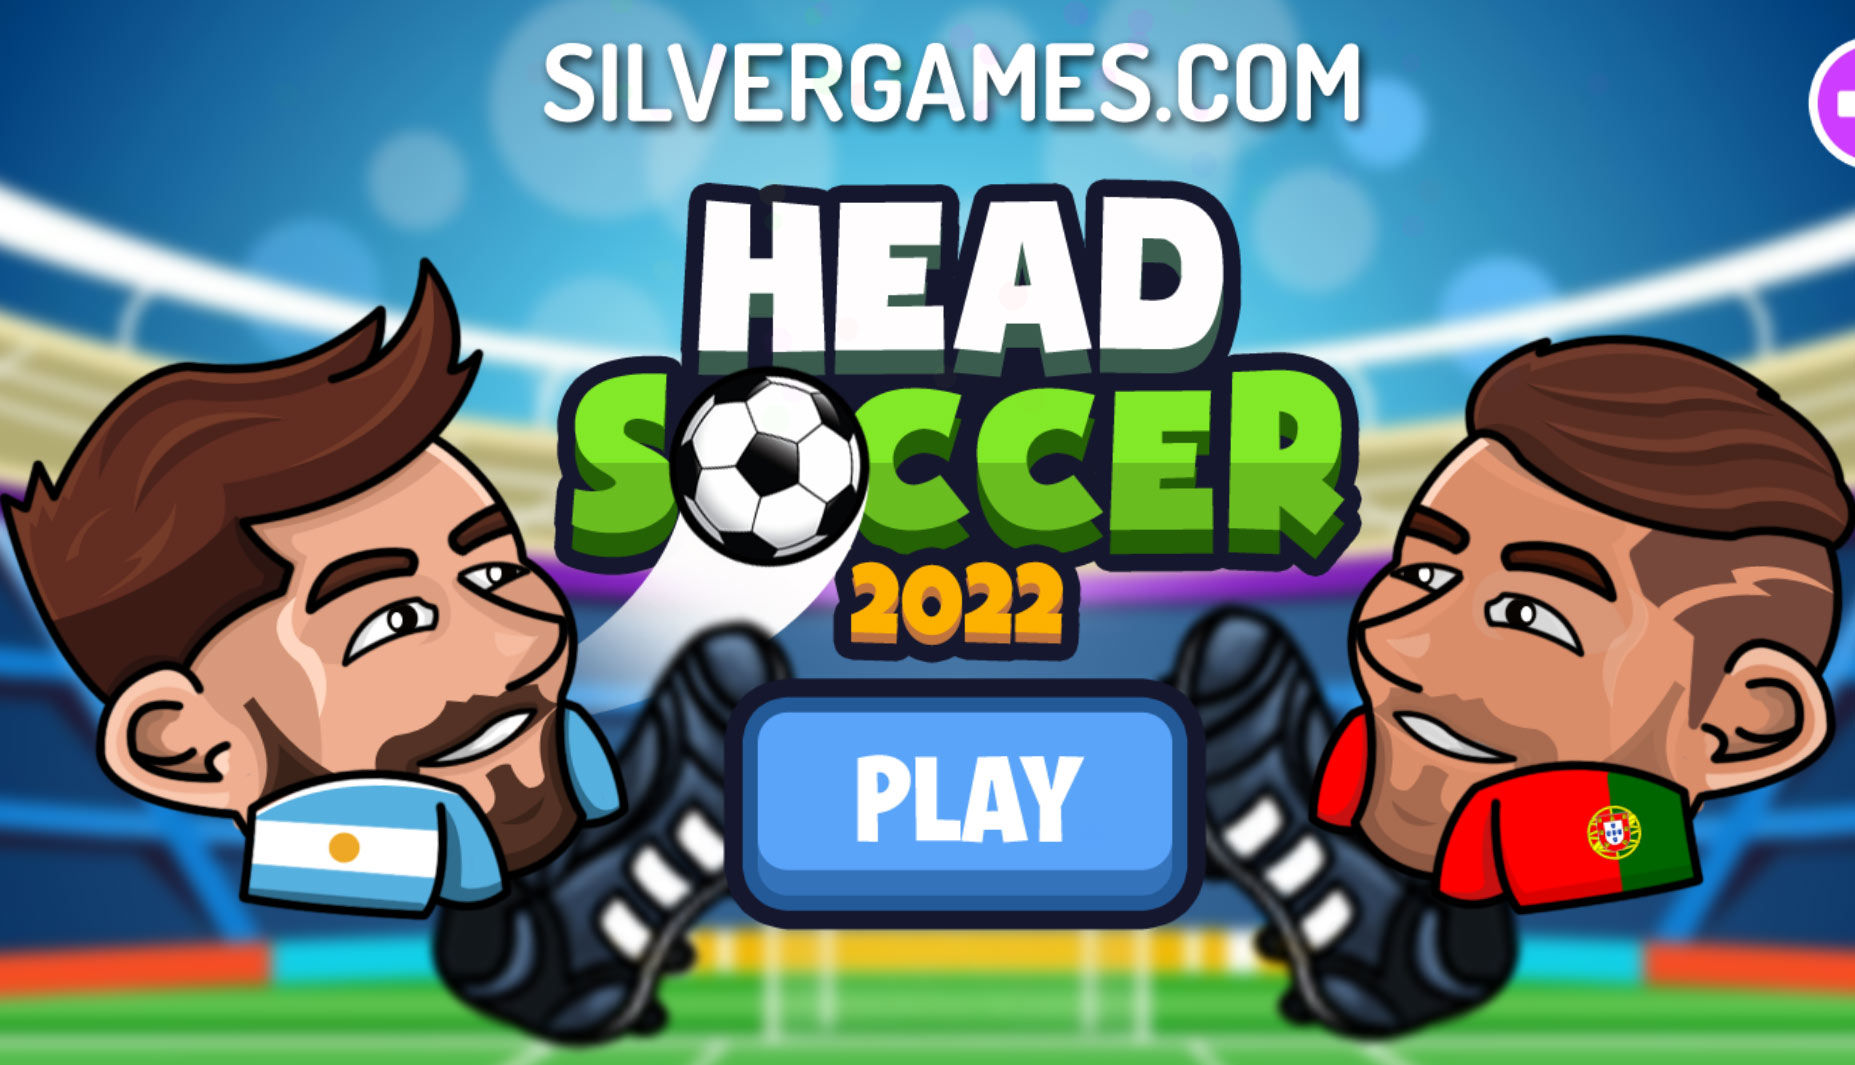 Head Soccer 2022 - Online Game - Play for Free